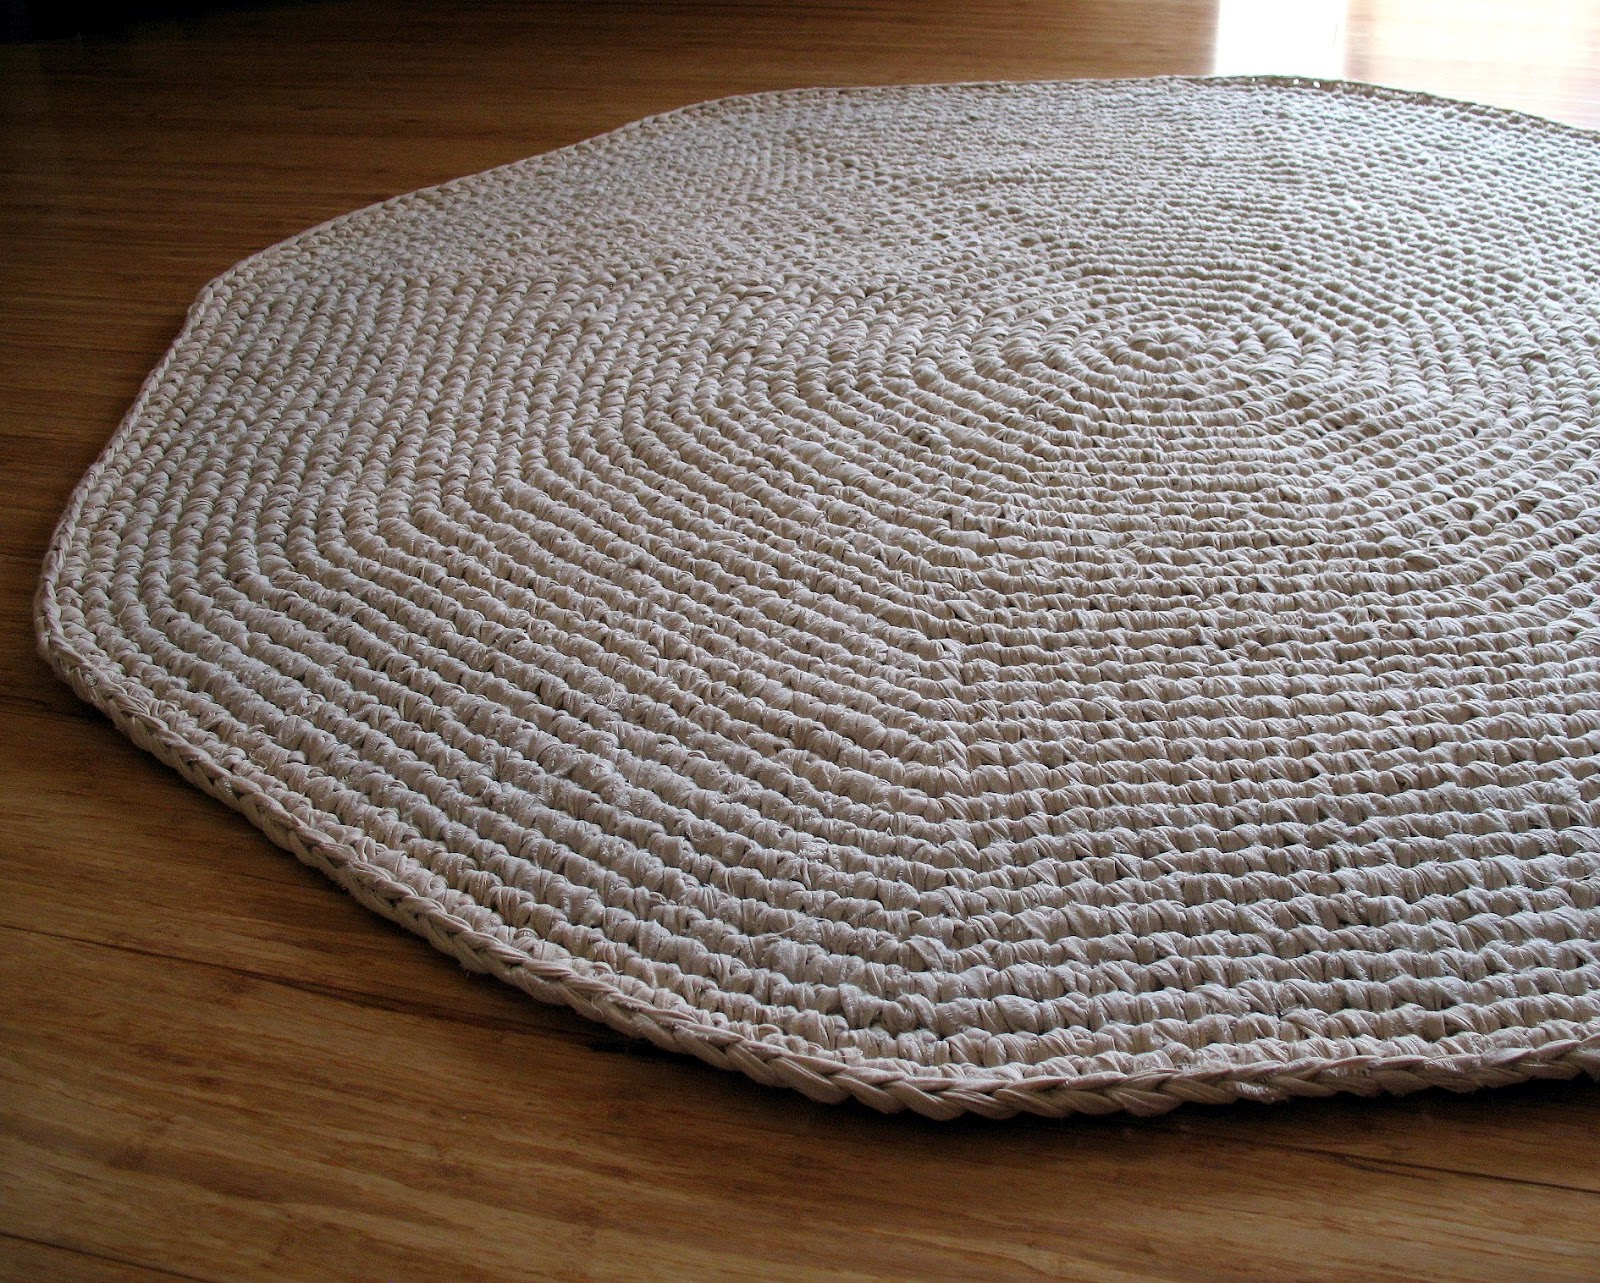 Crochet Rug Pattern Eclectic Me Calico Crochet Rug Pattern